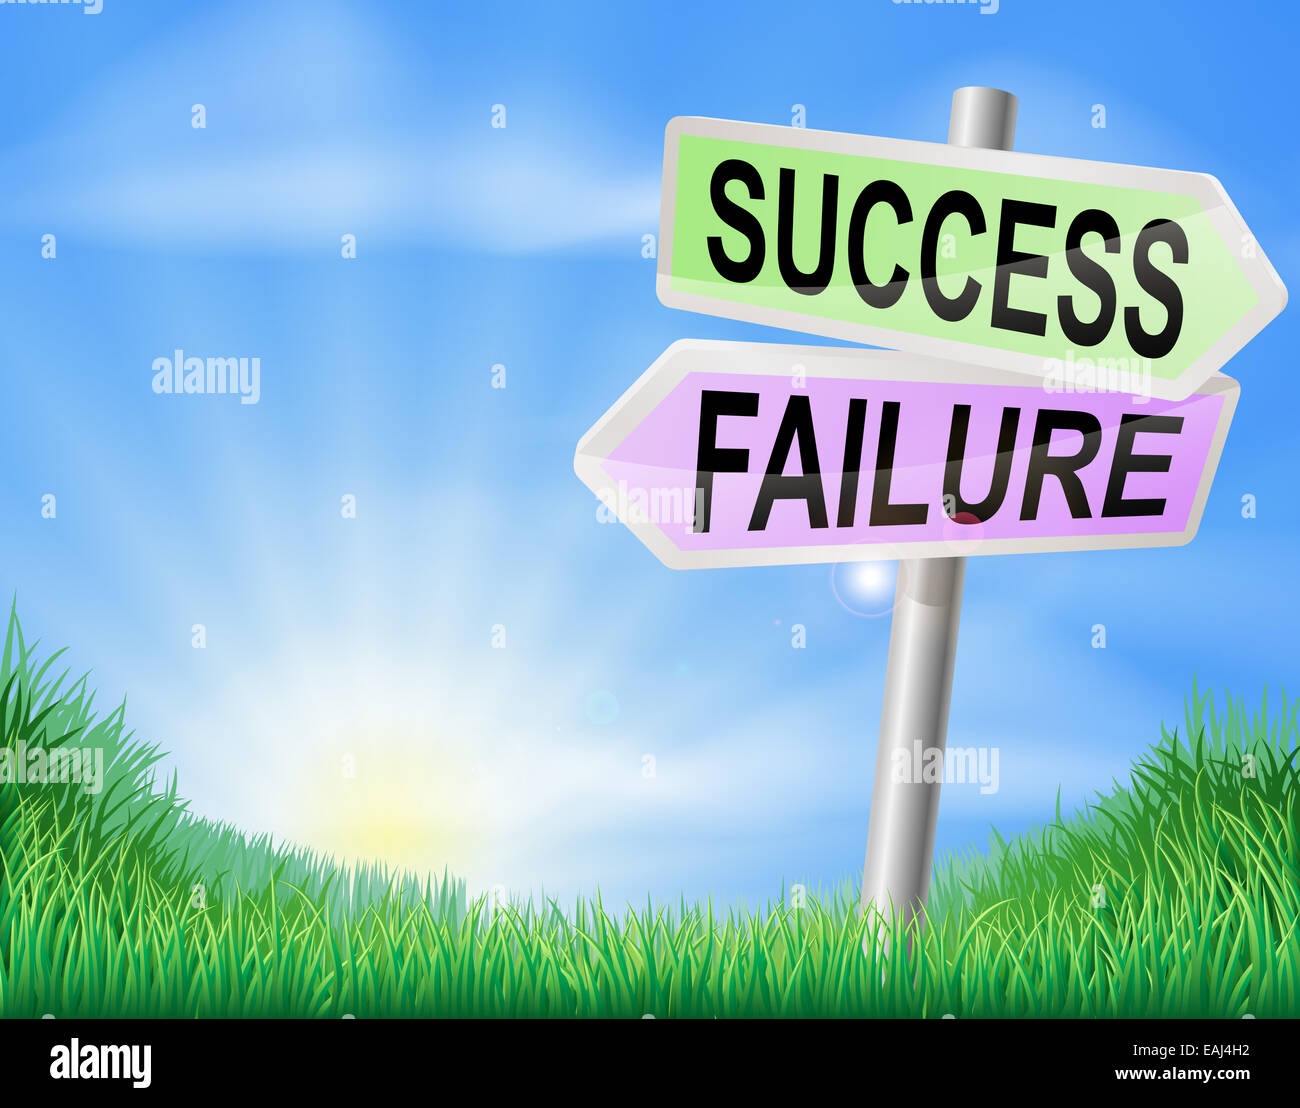 Success or failure sign in a sunny green field of lush grass Stock Photo